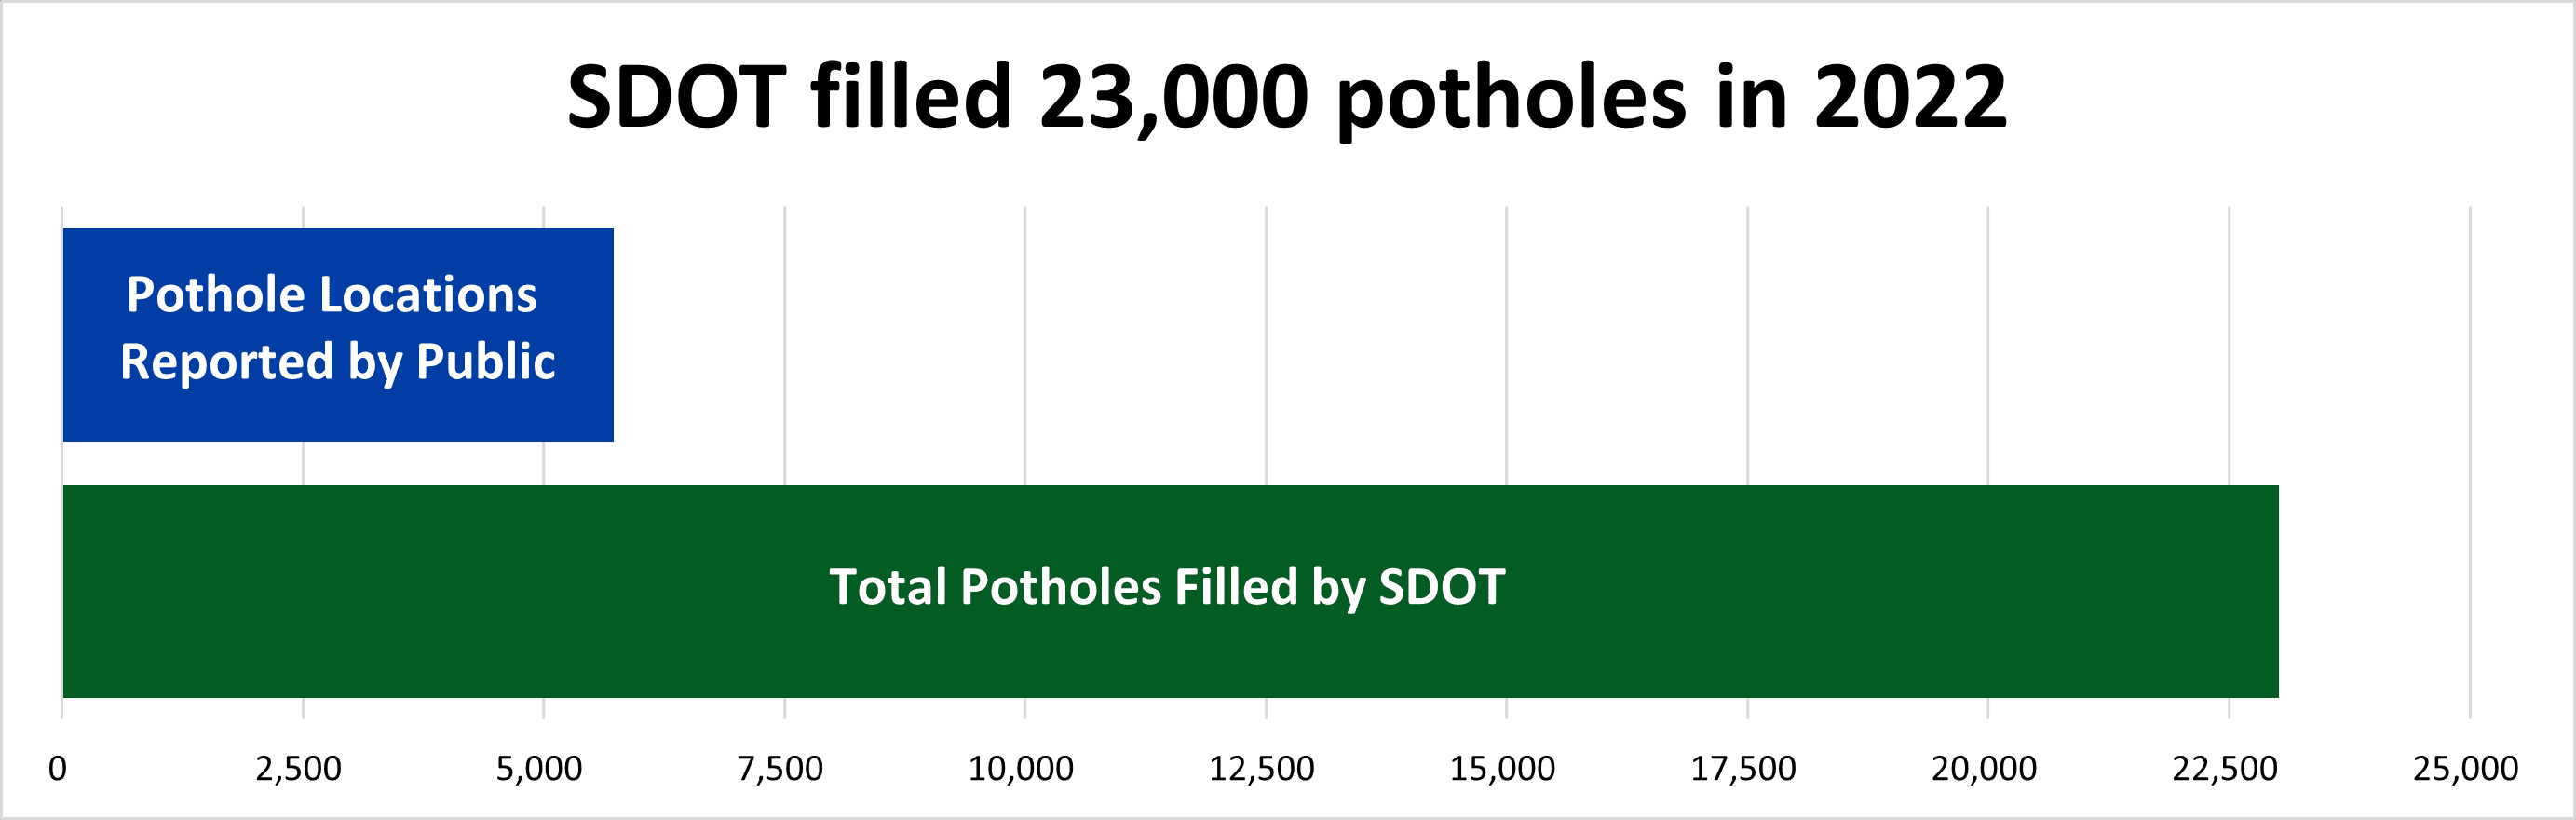 Bar chart showing the number of potholes SDOT filled in 2022, which is 23,000 potholes. A large green bar shows the total filled by SDOT, and a smaller blue bar indicates the pothole locations reported by the public, between 5,000 and 7,500 potholes.